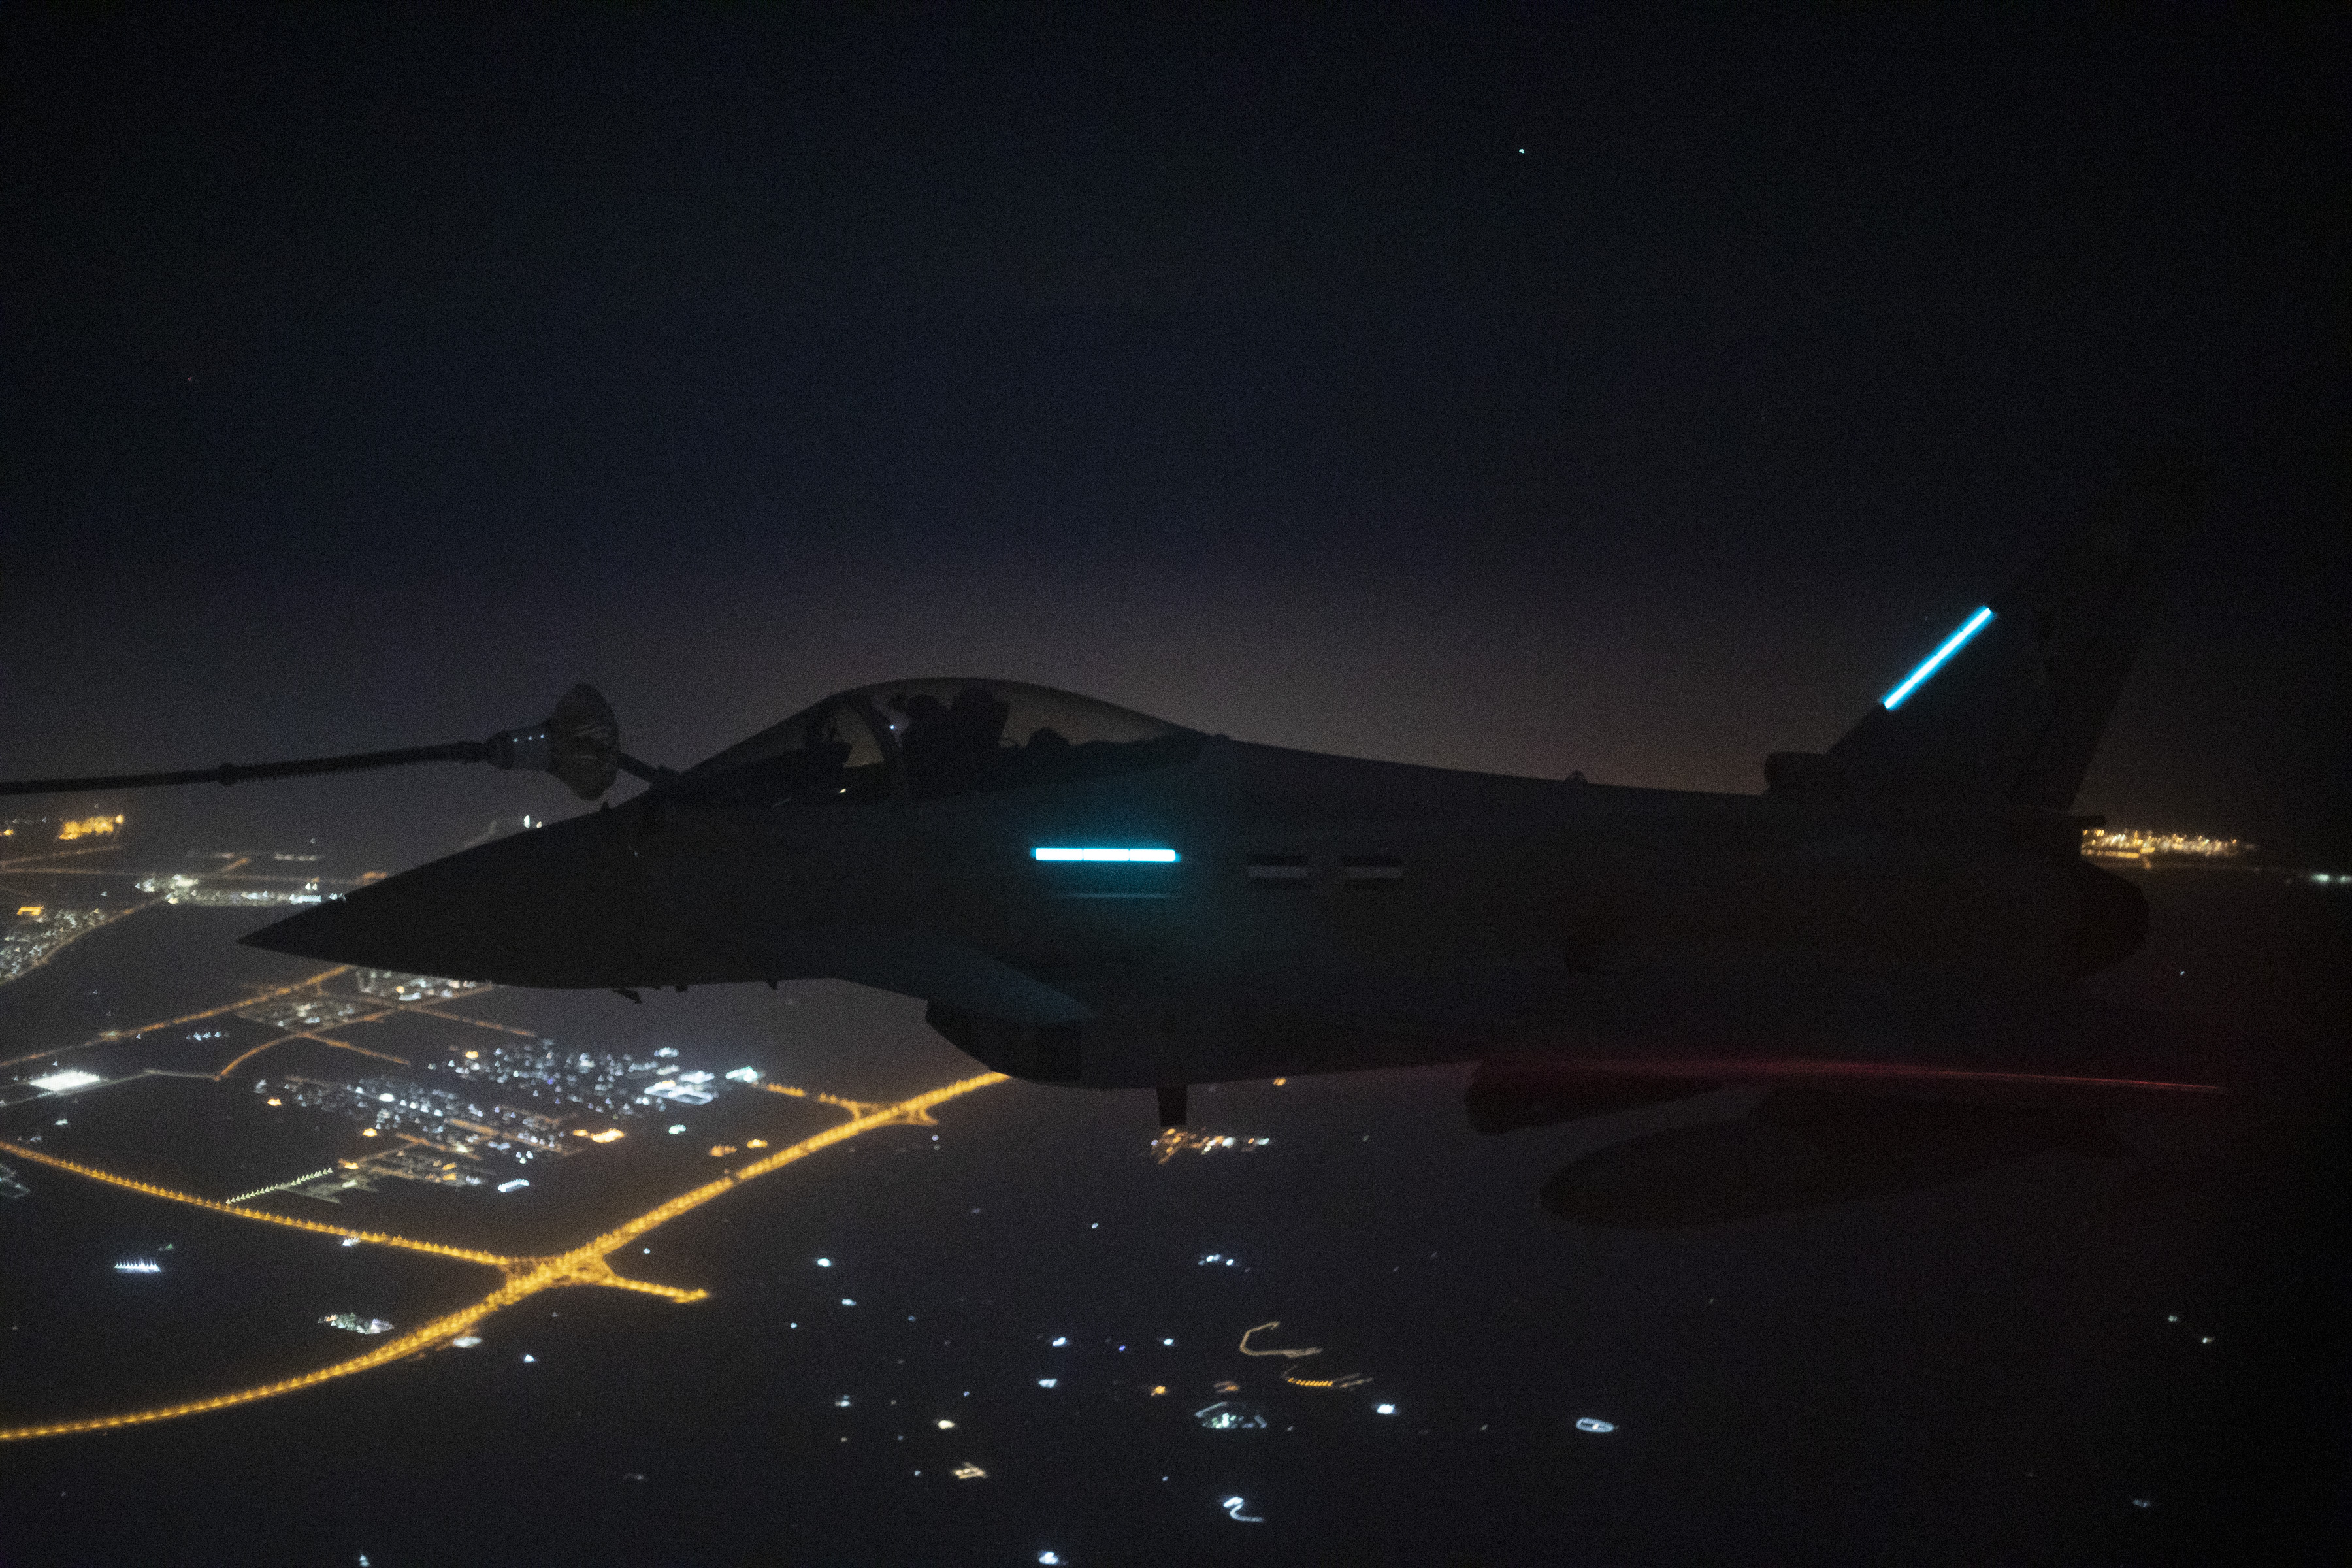 Image shows RAF Typhoon flying over Qatar during air to air refuelling exercise at nighttime.